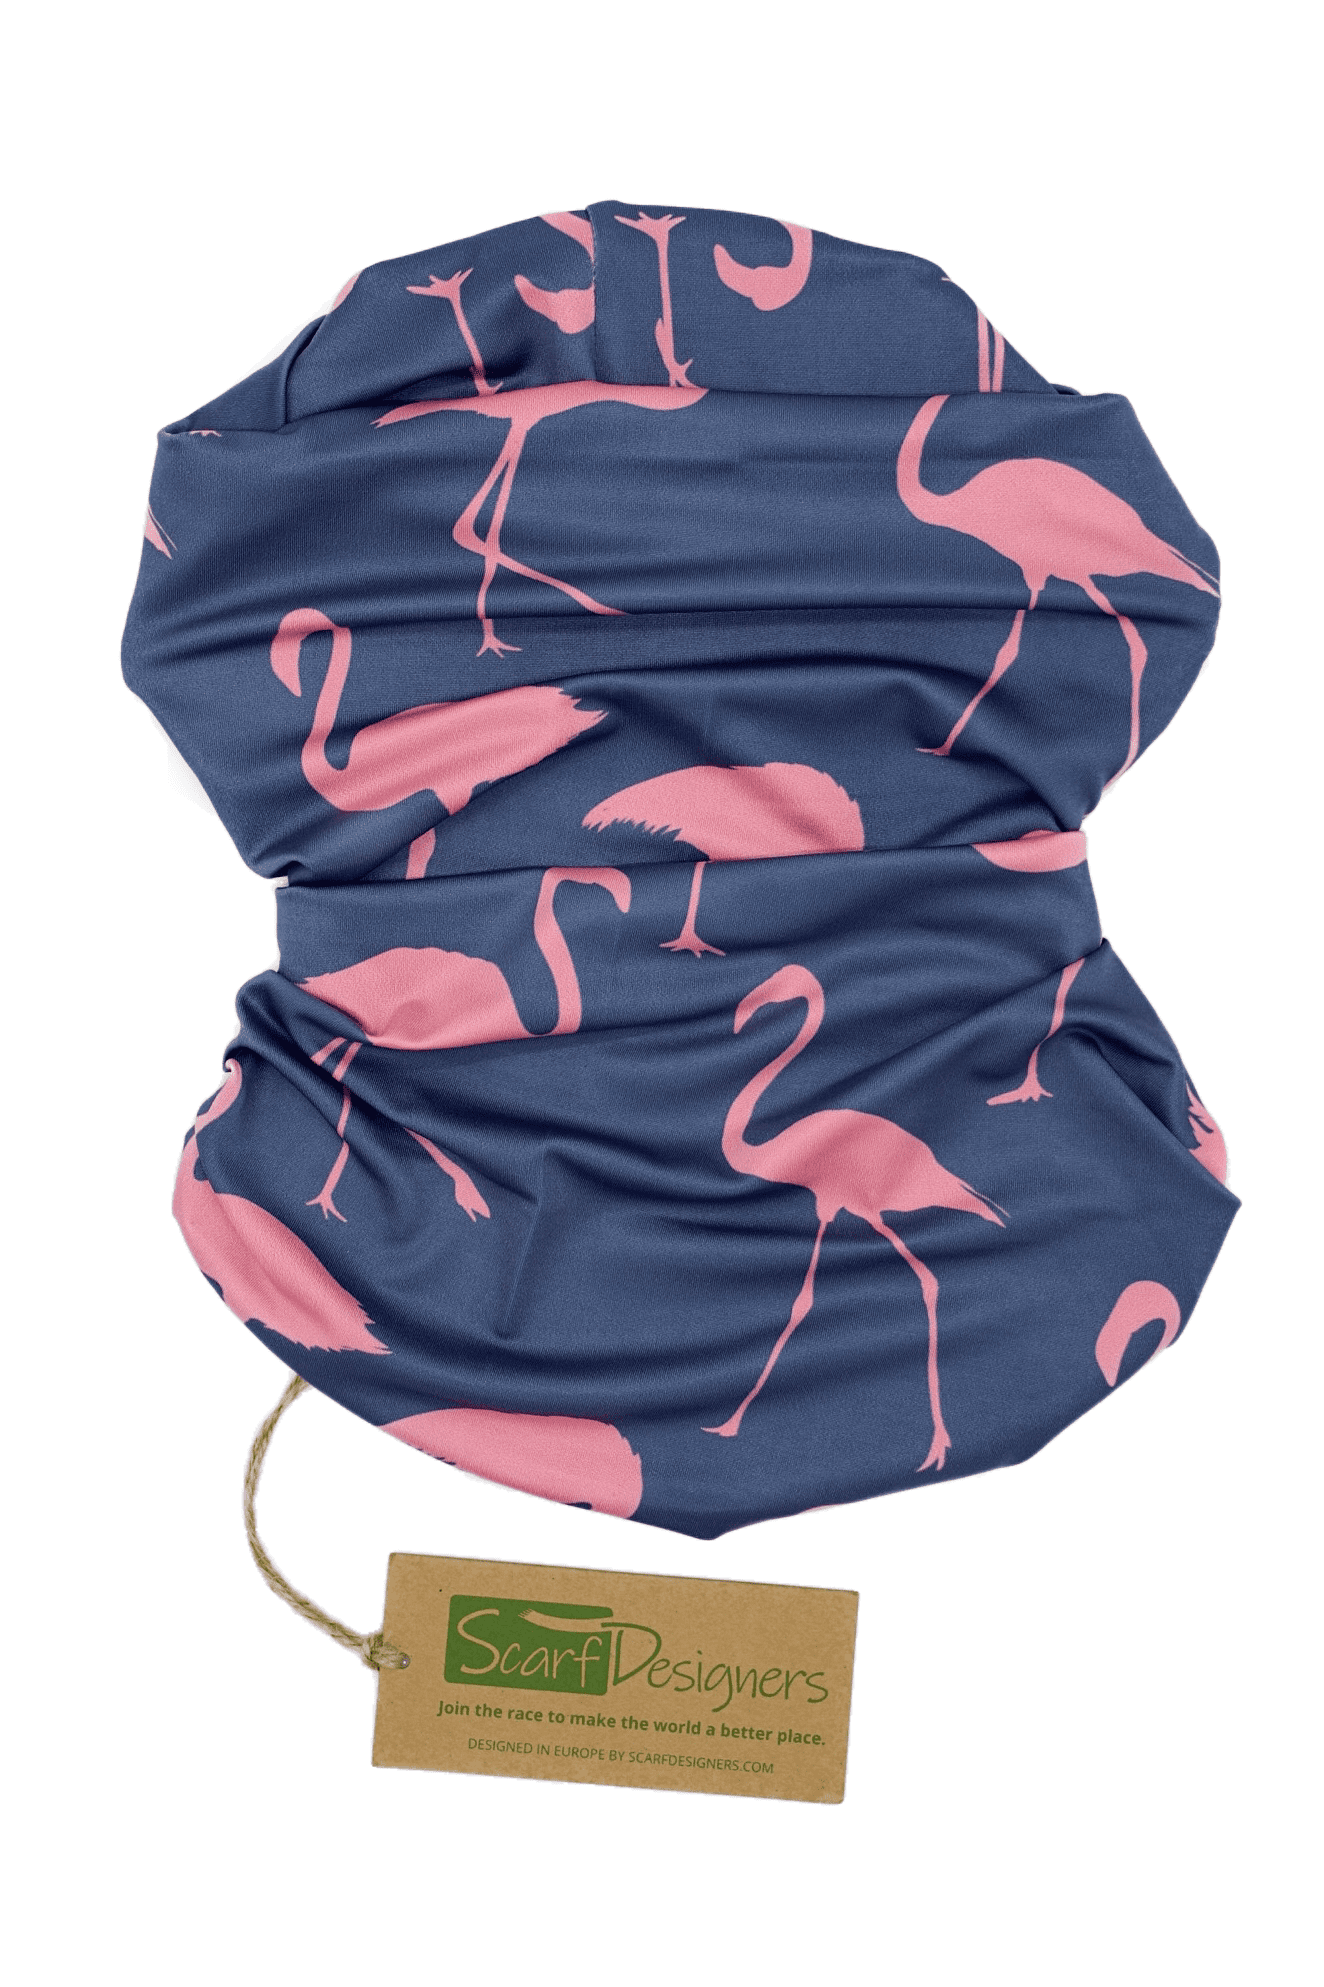 This is a multifunctional and sustainable bandana for women with flamingo print. It is made from recycled polyester which is breathable, durable, soft to touch, easy to care and fast drying material. It makes it perfectly suitable for all kinds of sports like biking, hiking, jogging or skiing. This is a versatile bandana that can be used as a scarf, face mask, bandana or headband and it is also known as tube scarf, neck gaiter or face mask. It is a vegan product certified by PETA.